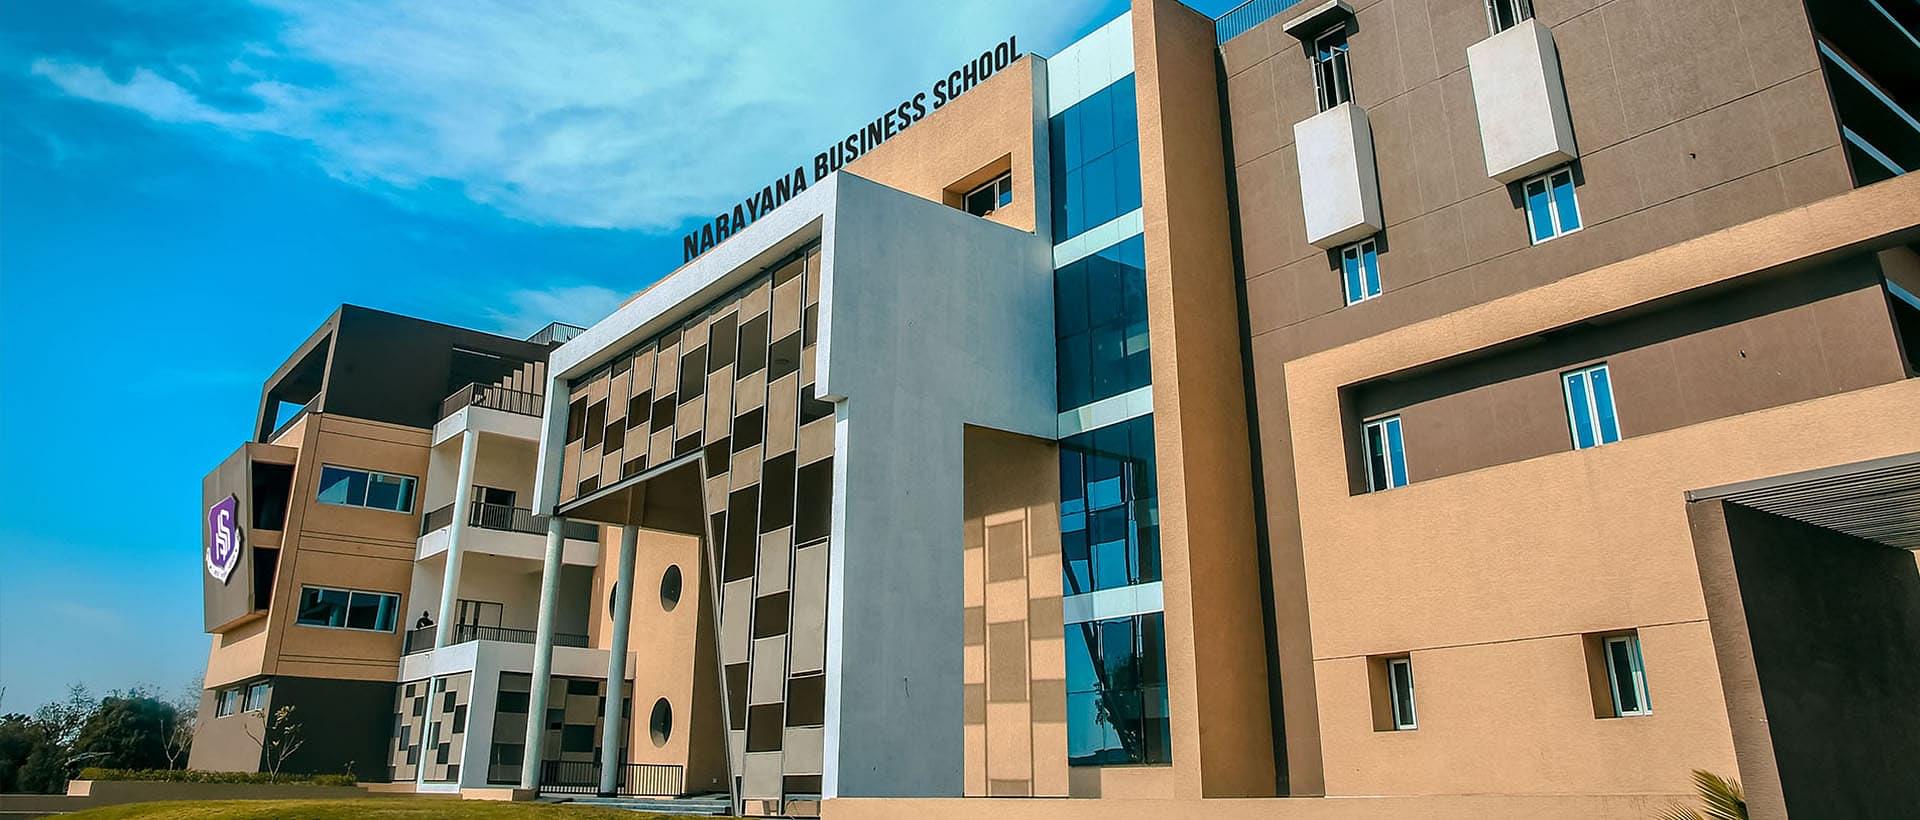 Narayana Business School Nbs Ahmedabad Placements